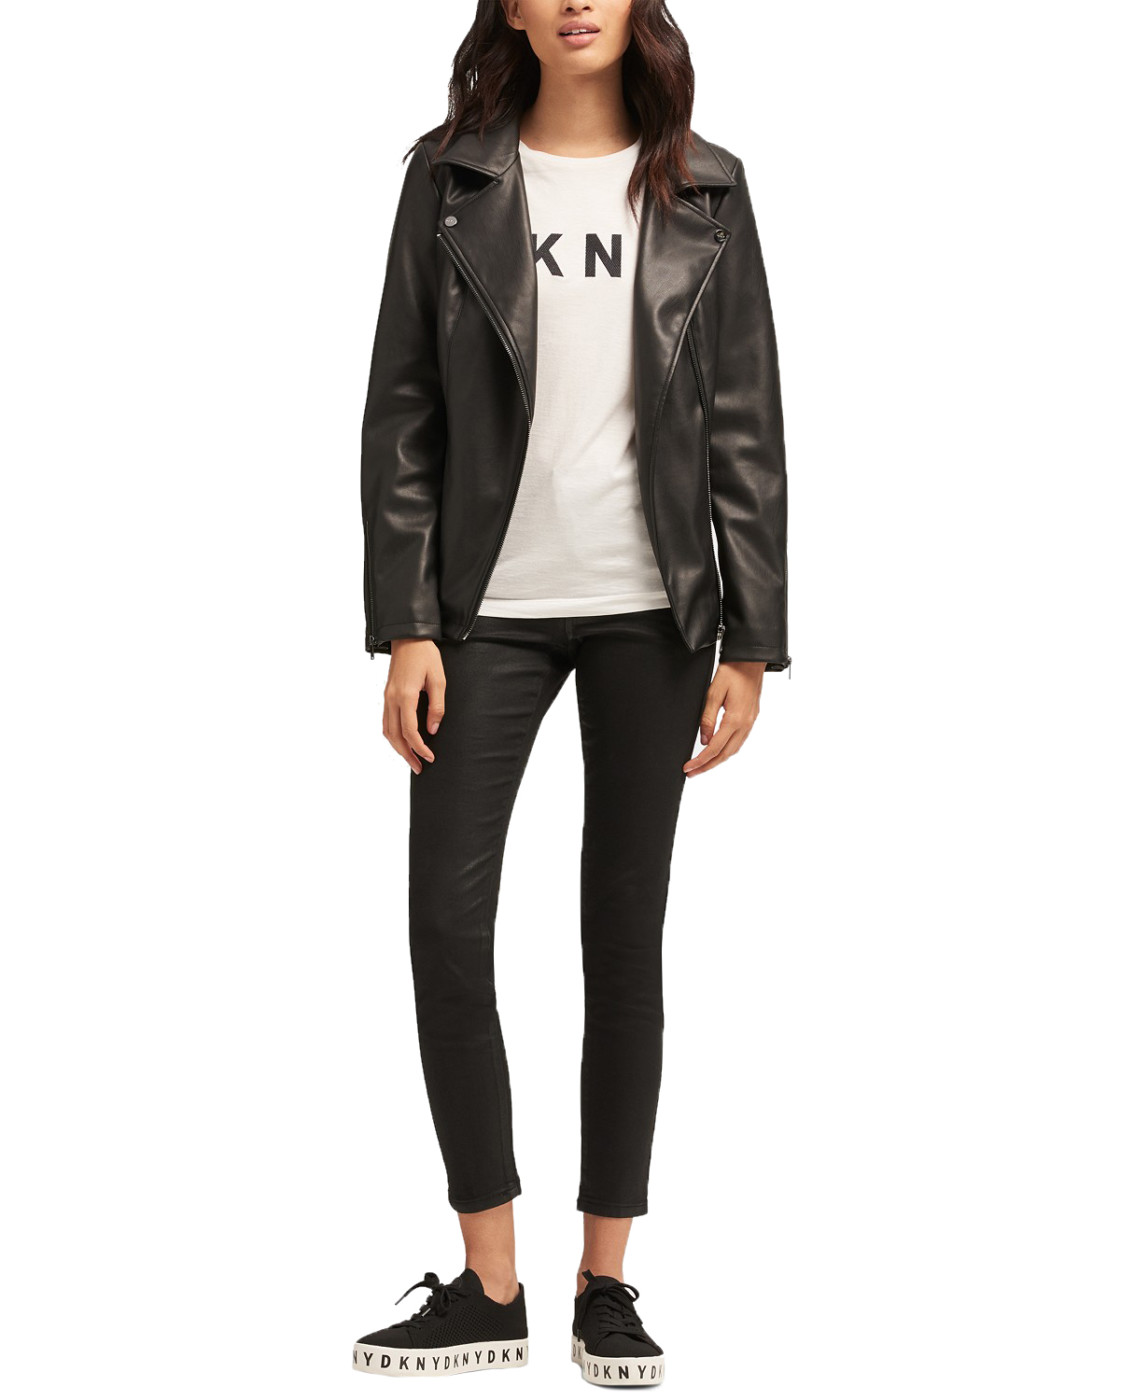 woocommerce-673321-2209615.cloudwaysapps.com-dkny-womens-belted-faux-leather-jacket